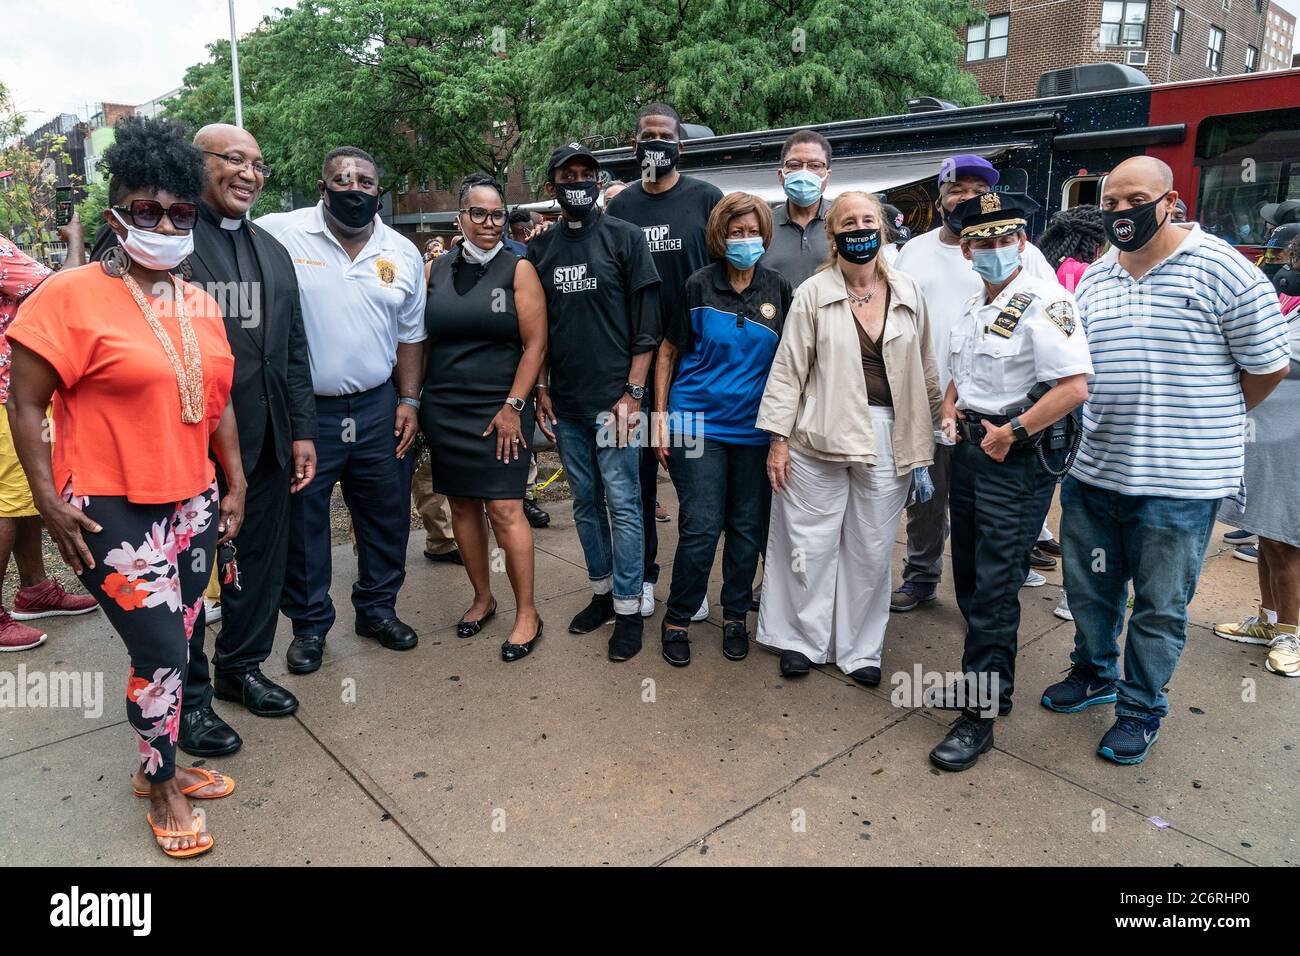 New York, United States. 11th July, 2020. Chaplain Robert Rice, NYPD Chief Jeffrey Maddrey, Hazel Dukes, Gale Brewer, Chief Kathleen O'Reilly and activists attend Occupy the Corner rally in East Harlem in response on gun violence in New York on July 11, 2020. Gun violence in 2020 surged by more than 100% in New York City mostly in neighborhoods with high rate of poverty and high level of COVID-19 cases. Community activists and police department encreased presence in those areas in order to stop gun violence. (Photo by Lev Radin/Sipa USA) Credit: Sipa USA/Alamy Live News Stock Photo